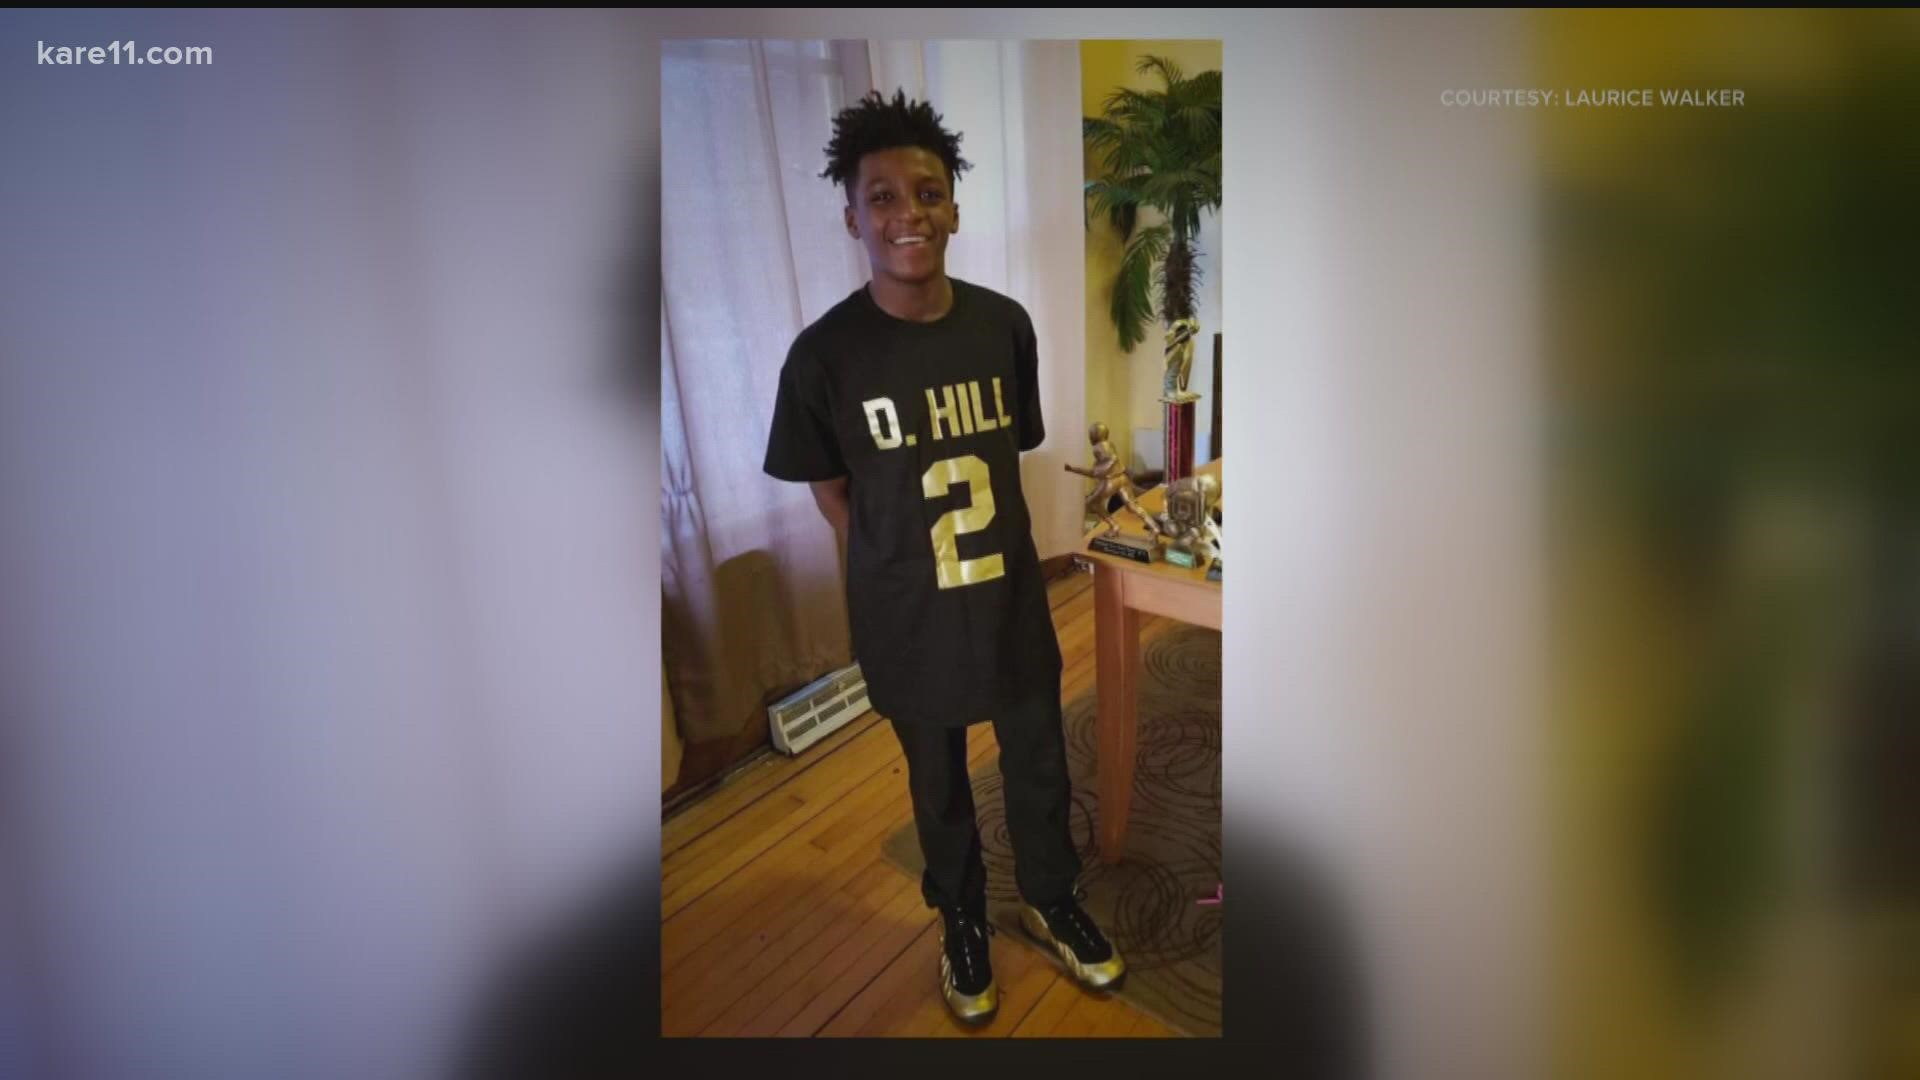 Police say Deshaun Hill was shot Feb. 9 in the area of Penn Avenue North and Golden Valley Road. He was rushed to the hospital, where he died the next day.